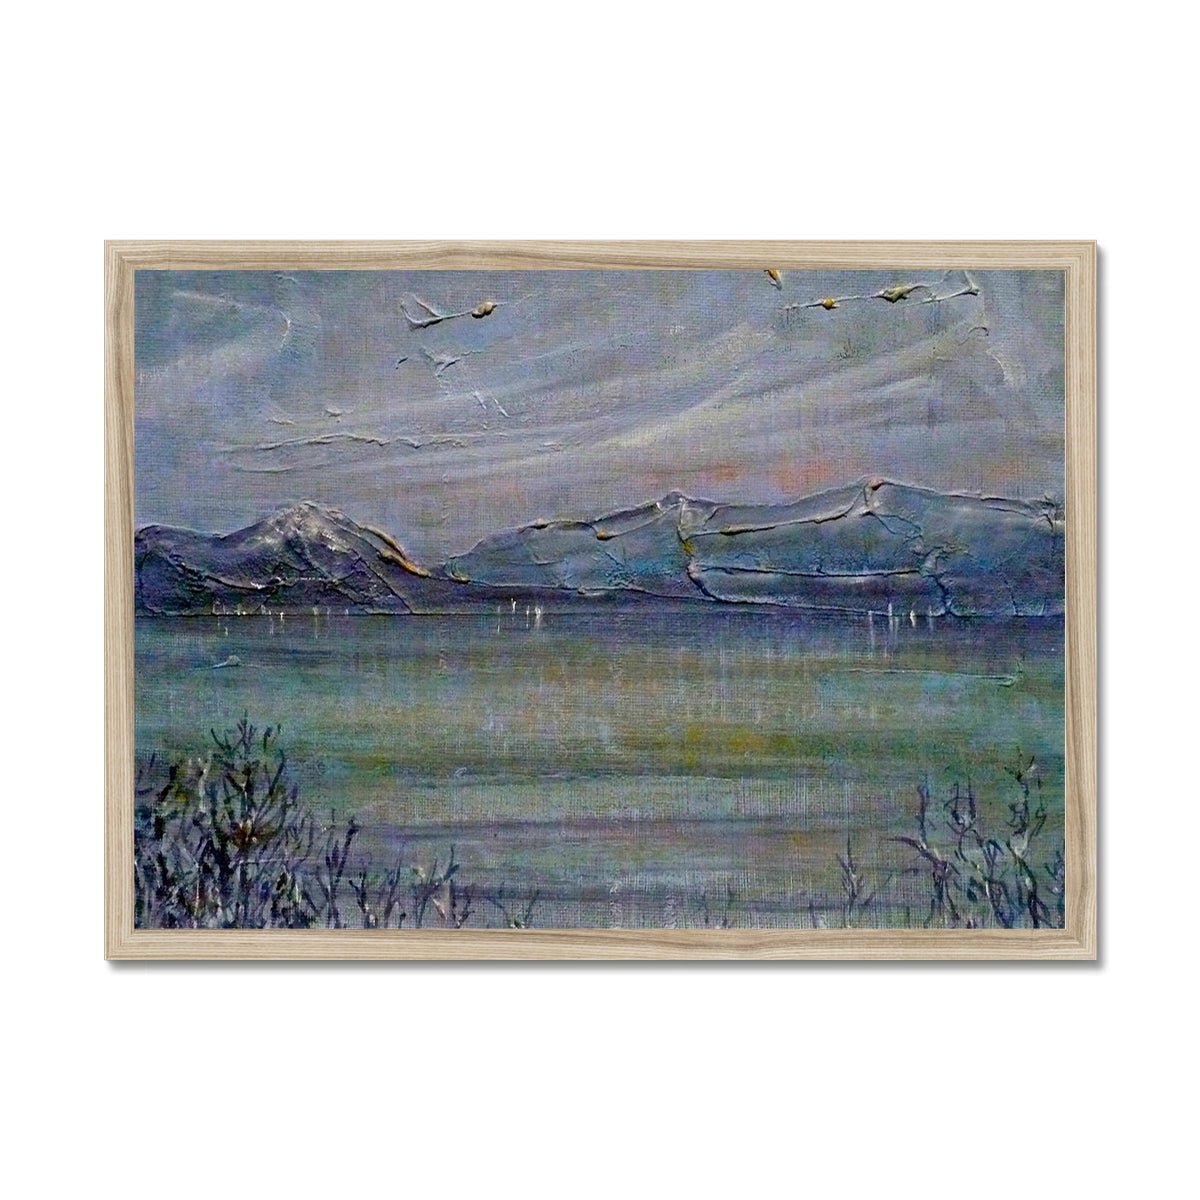 Loch Morlich Moonlight Painting | Framed Prints From Scotland-Framed Prints-Scottish Lochs & Mountains Art Gallery-A2 Landscape-Natural Frame-Paintings, Prints, Homeware, Art Gifts From Scotland By Scottish Artist Kevin Hunter